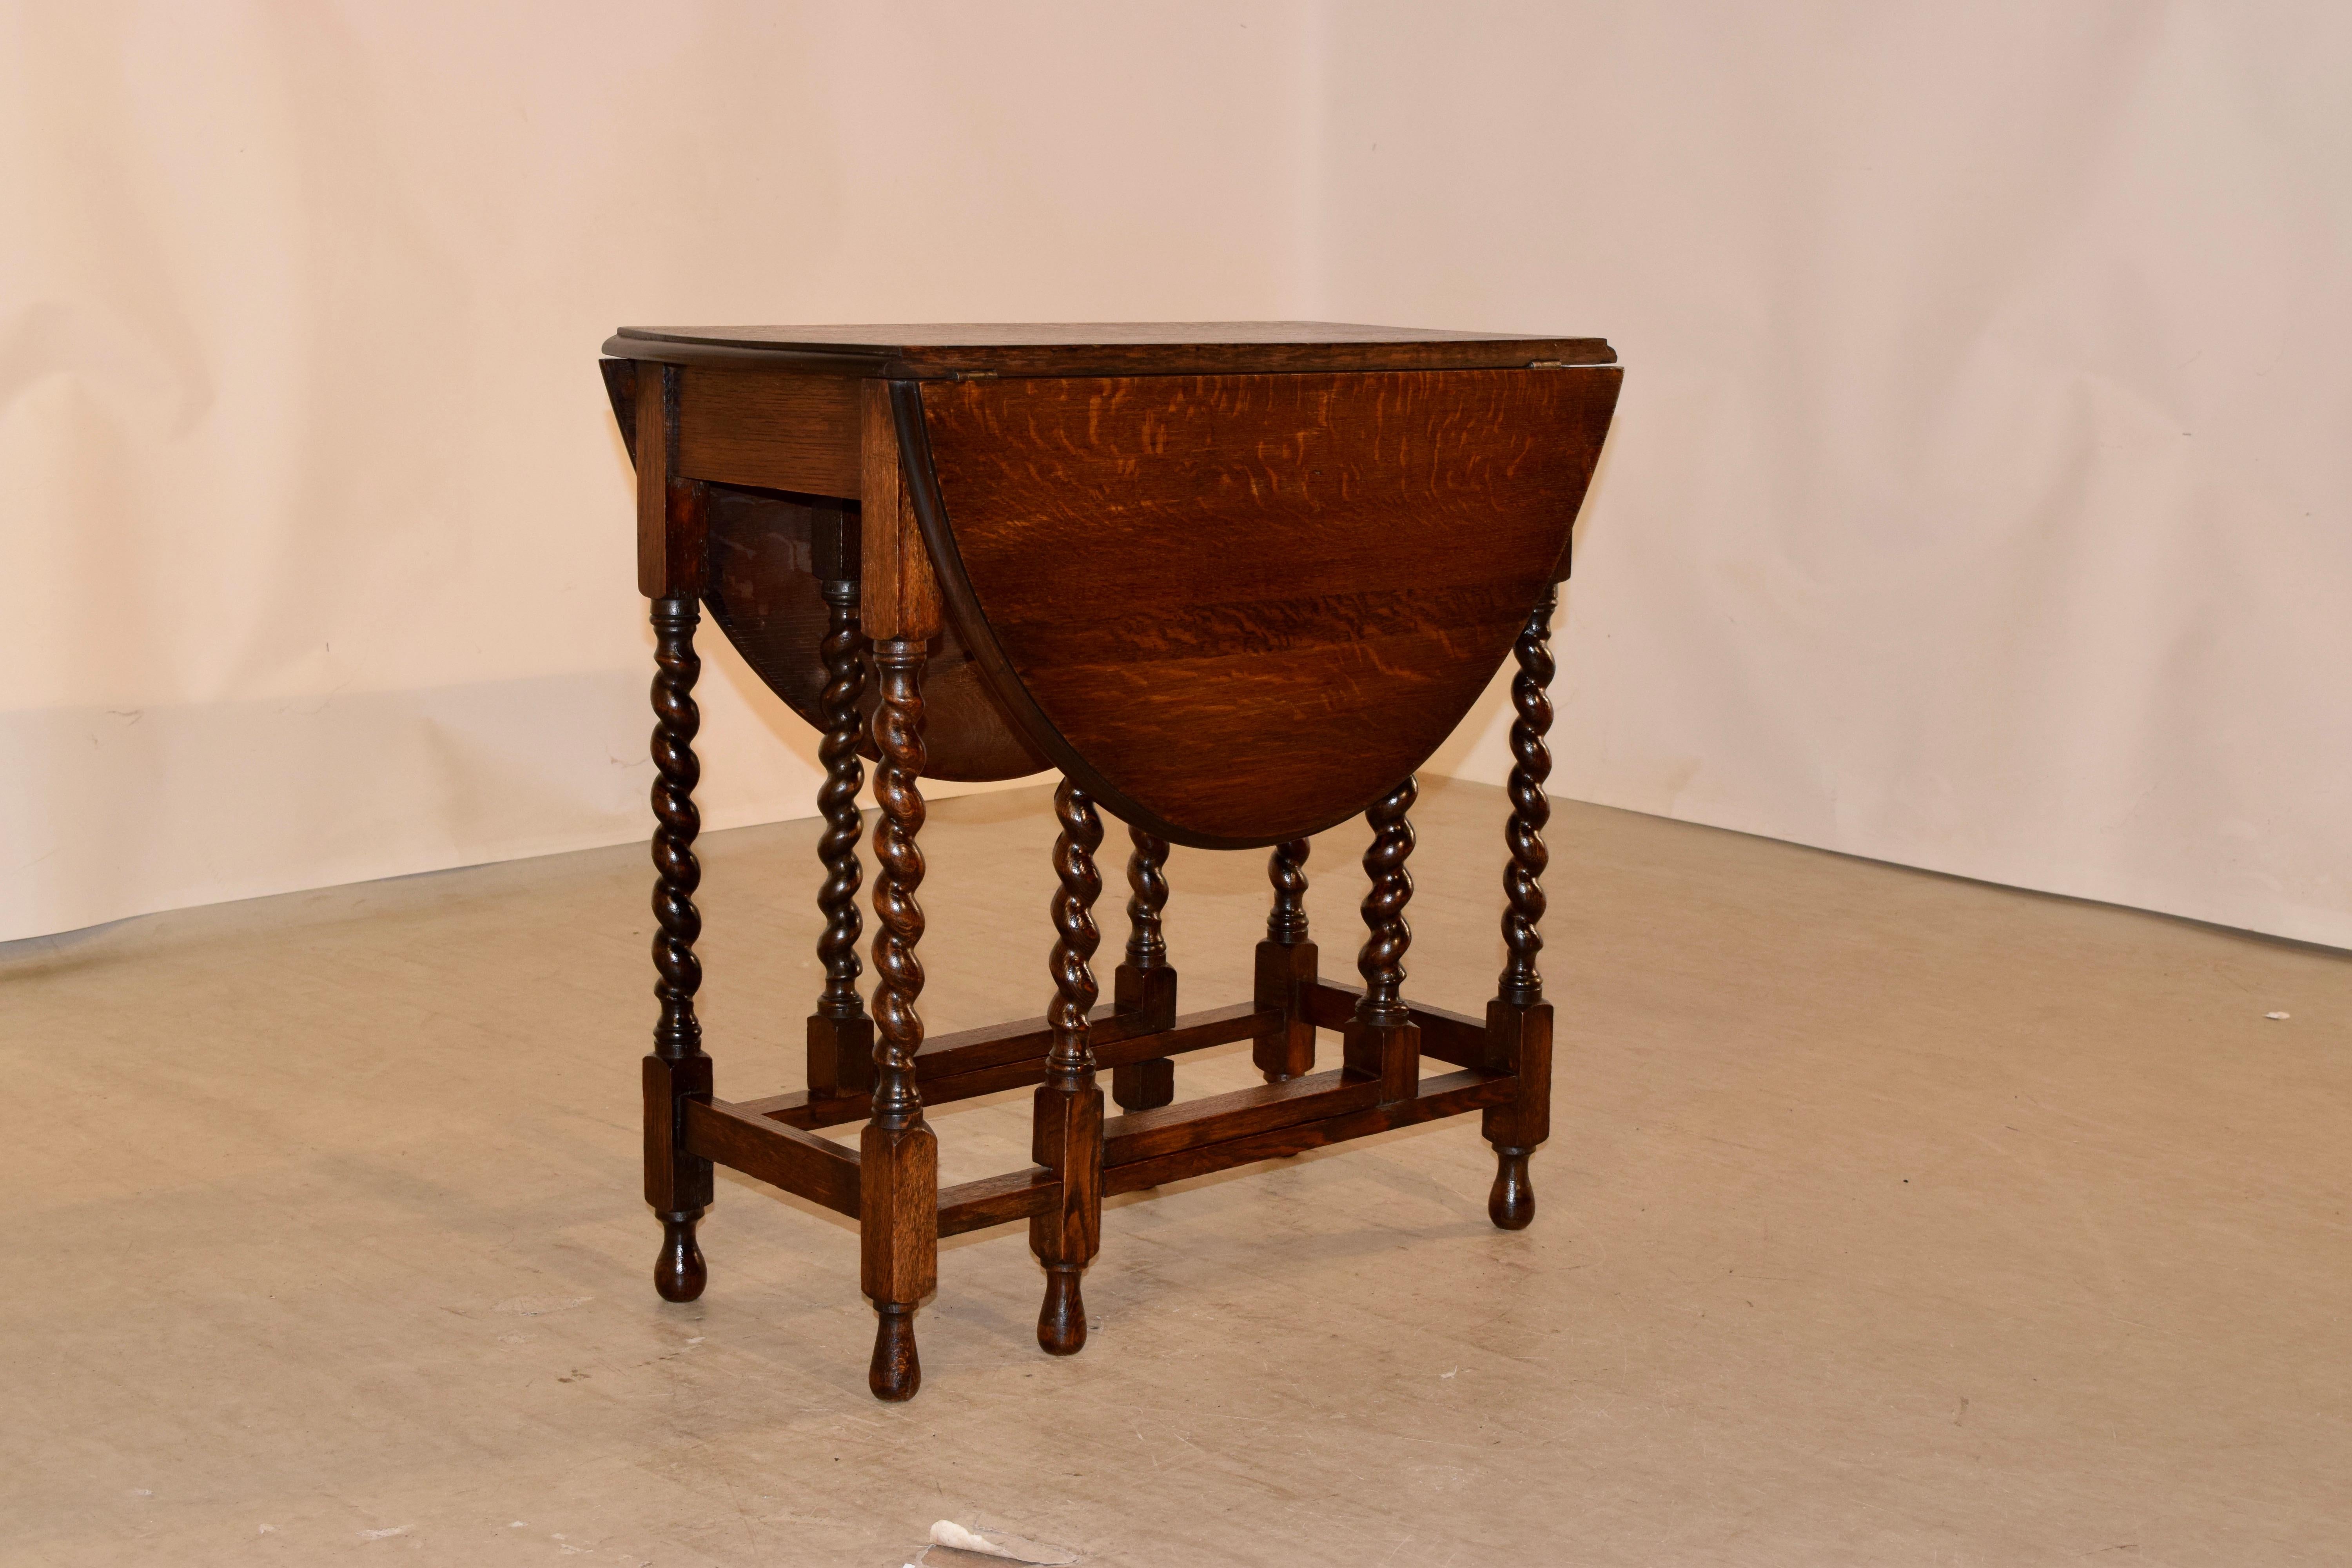 Circa 1900 Edwardian oak gate leg table with two drop leaves. The top has a beveled edge and follows down to a simple apron and is supported on hand turned barley twist legs joined by simple stretchers and hand turned feet. The top open measures